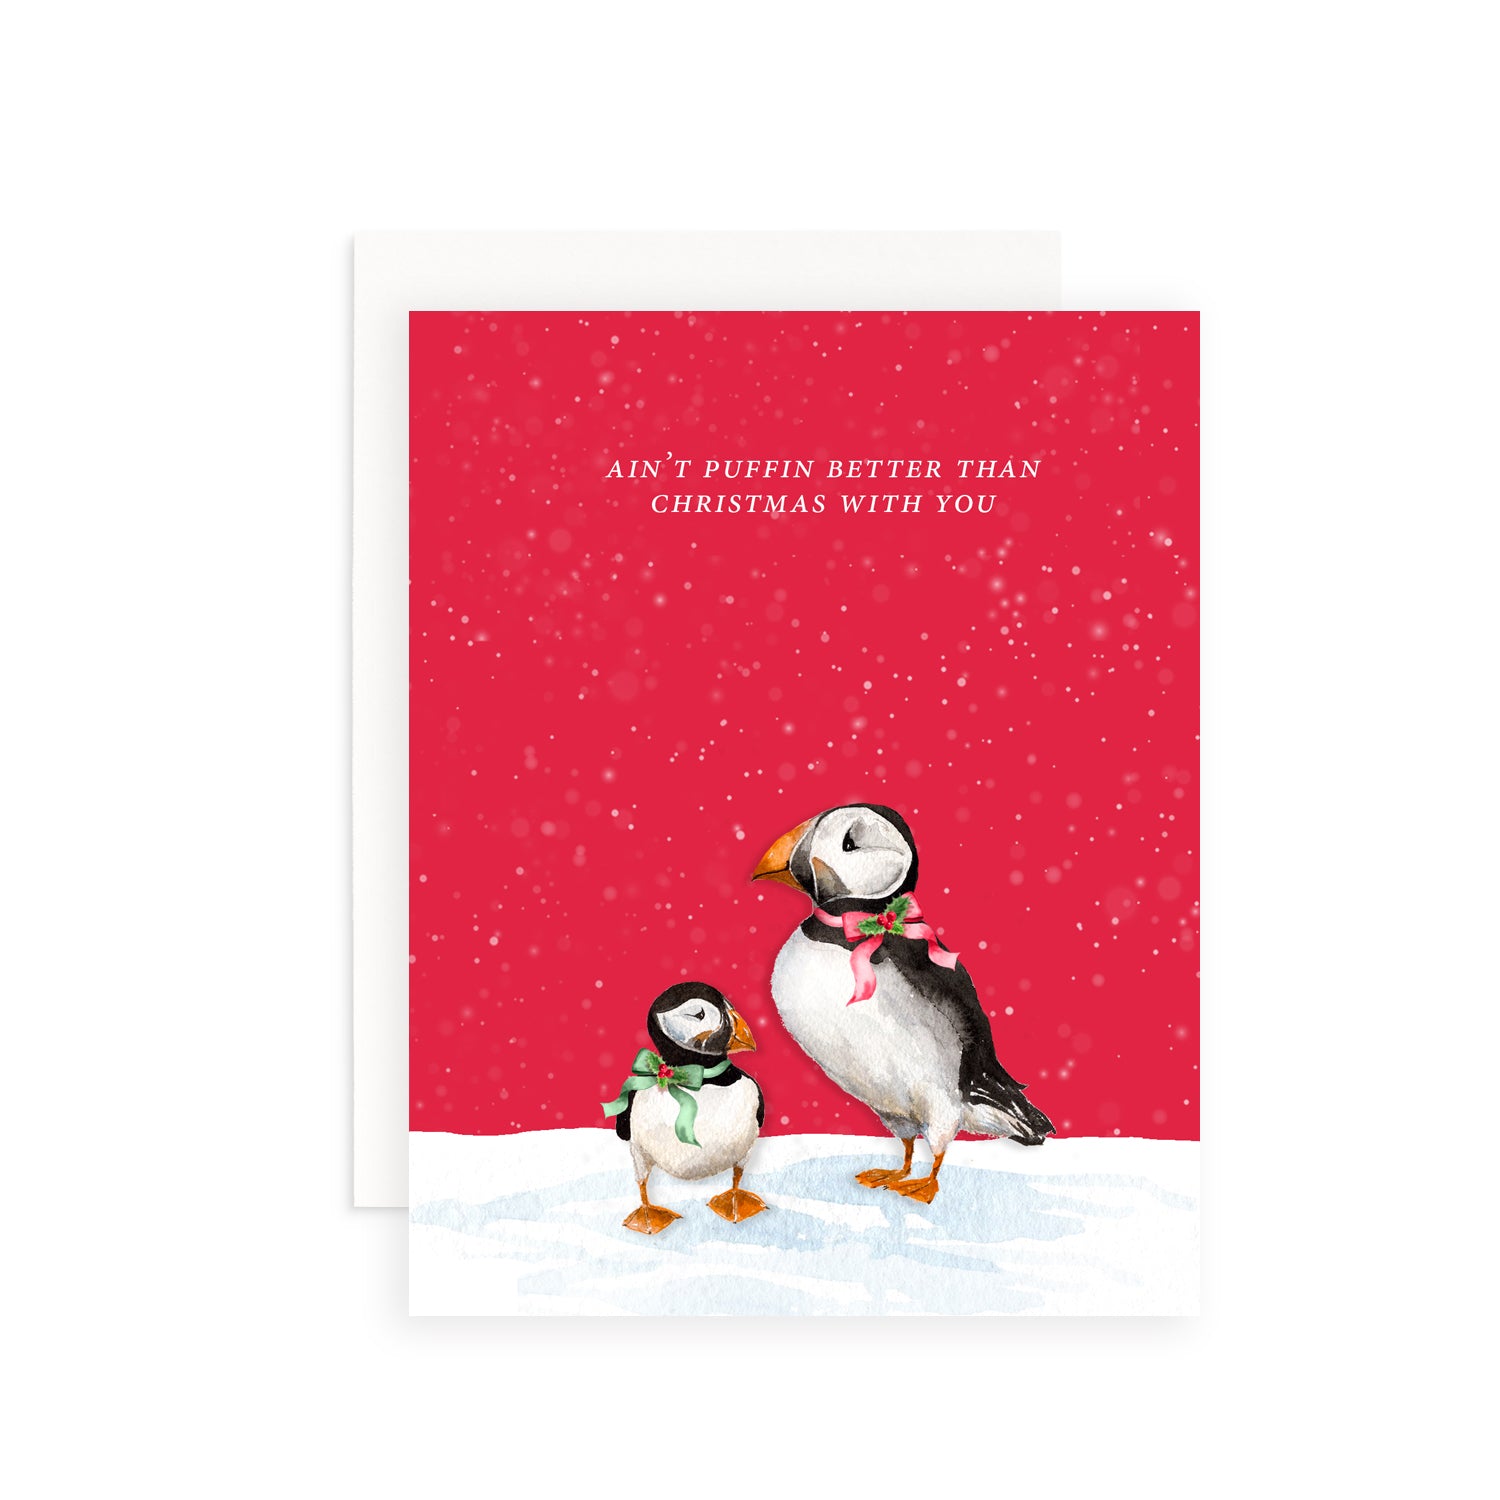 Ain't Puffin Better Than Christmas With You Greeting Card